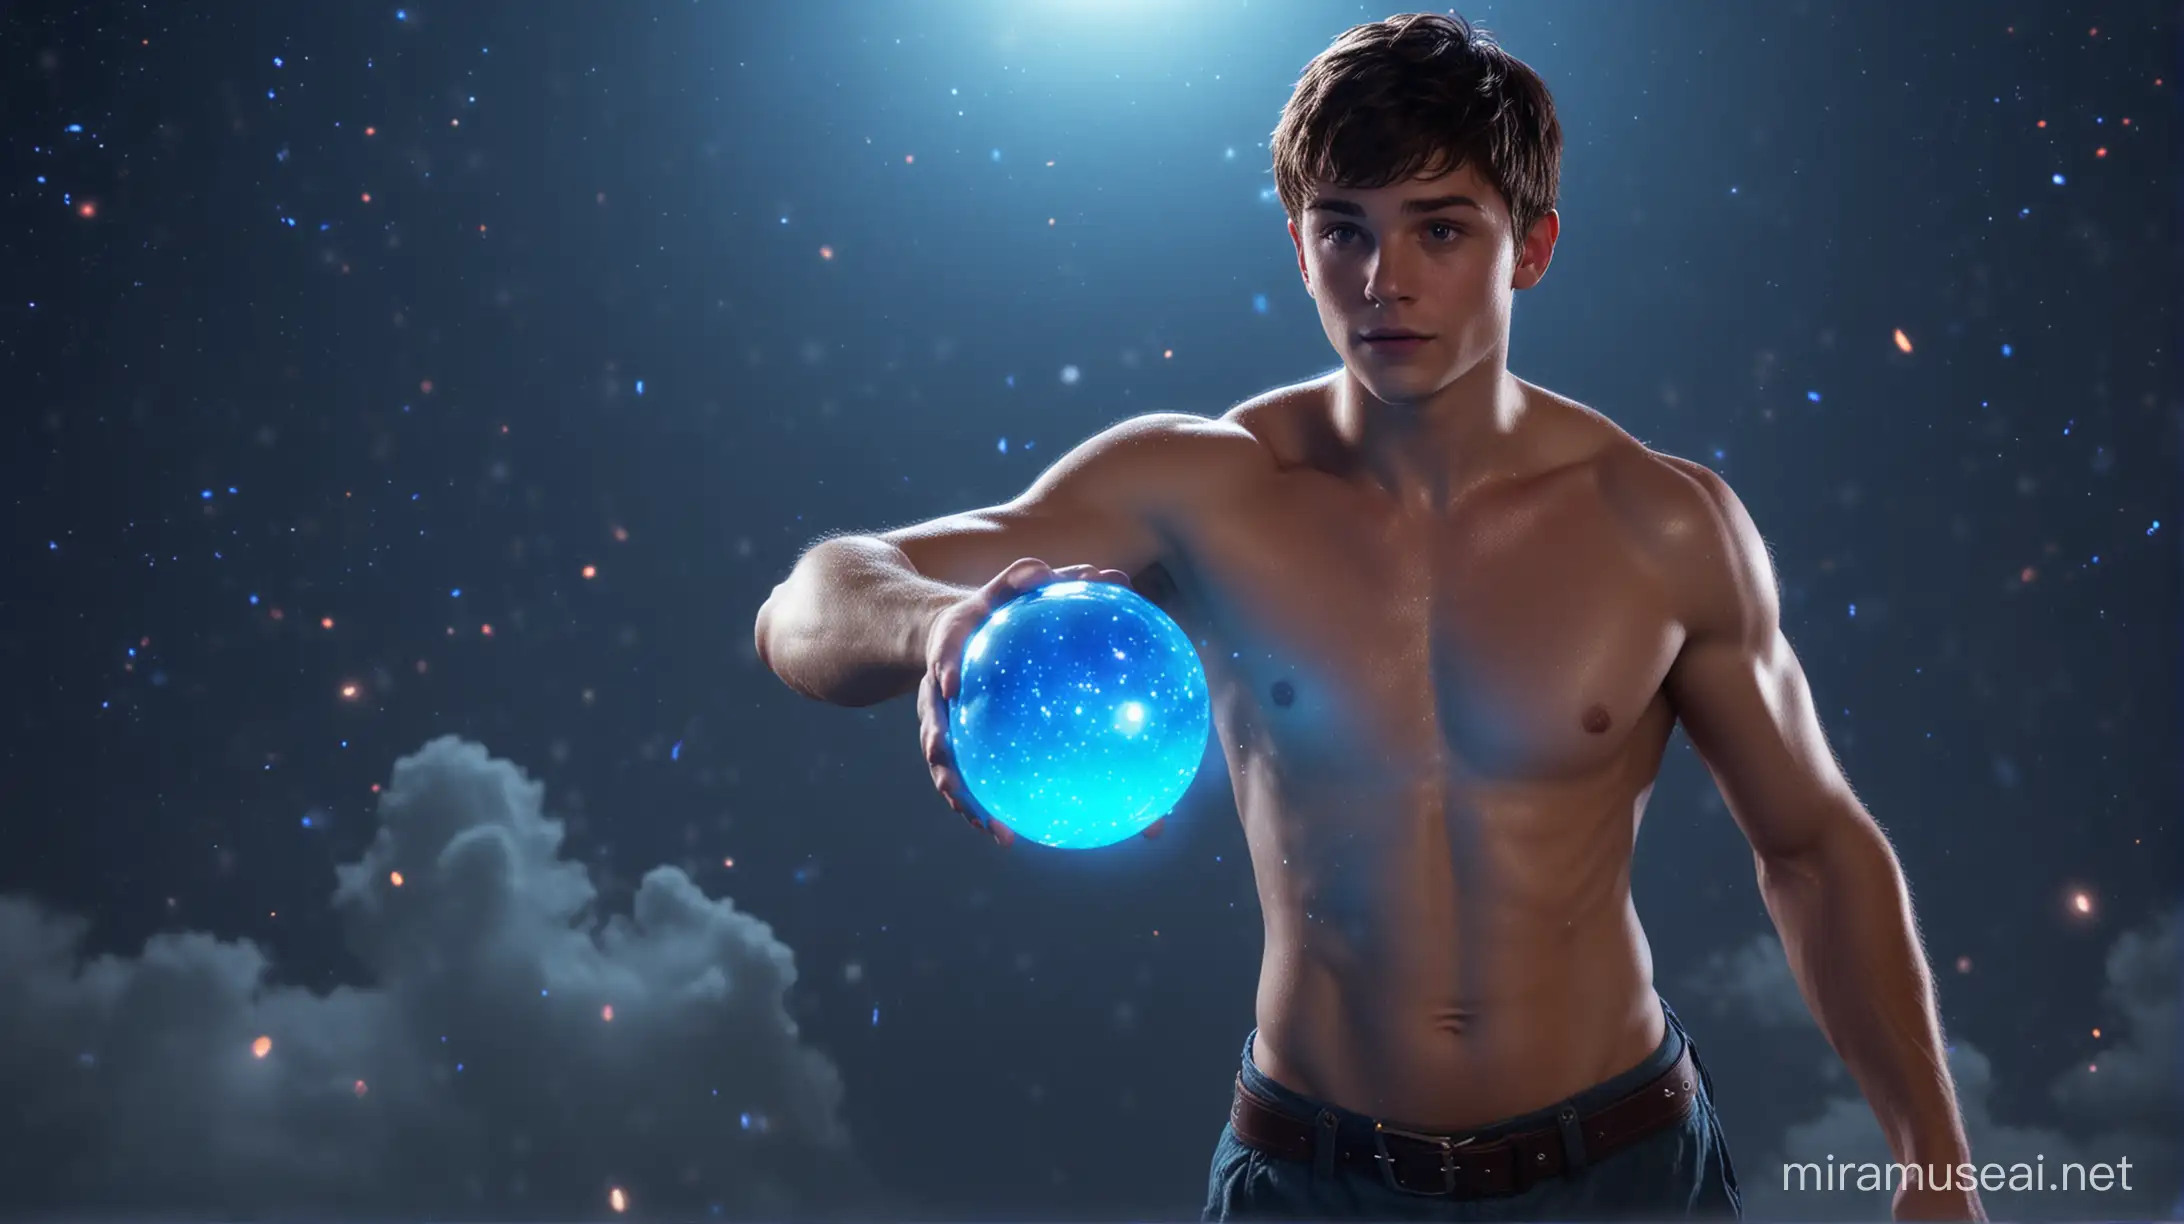 Muscular Shirtless Peter Pan Flying with Blue Orb in Neon Night Sky